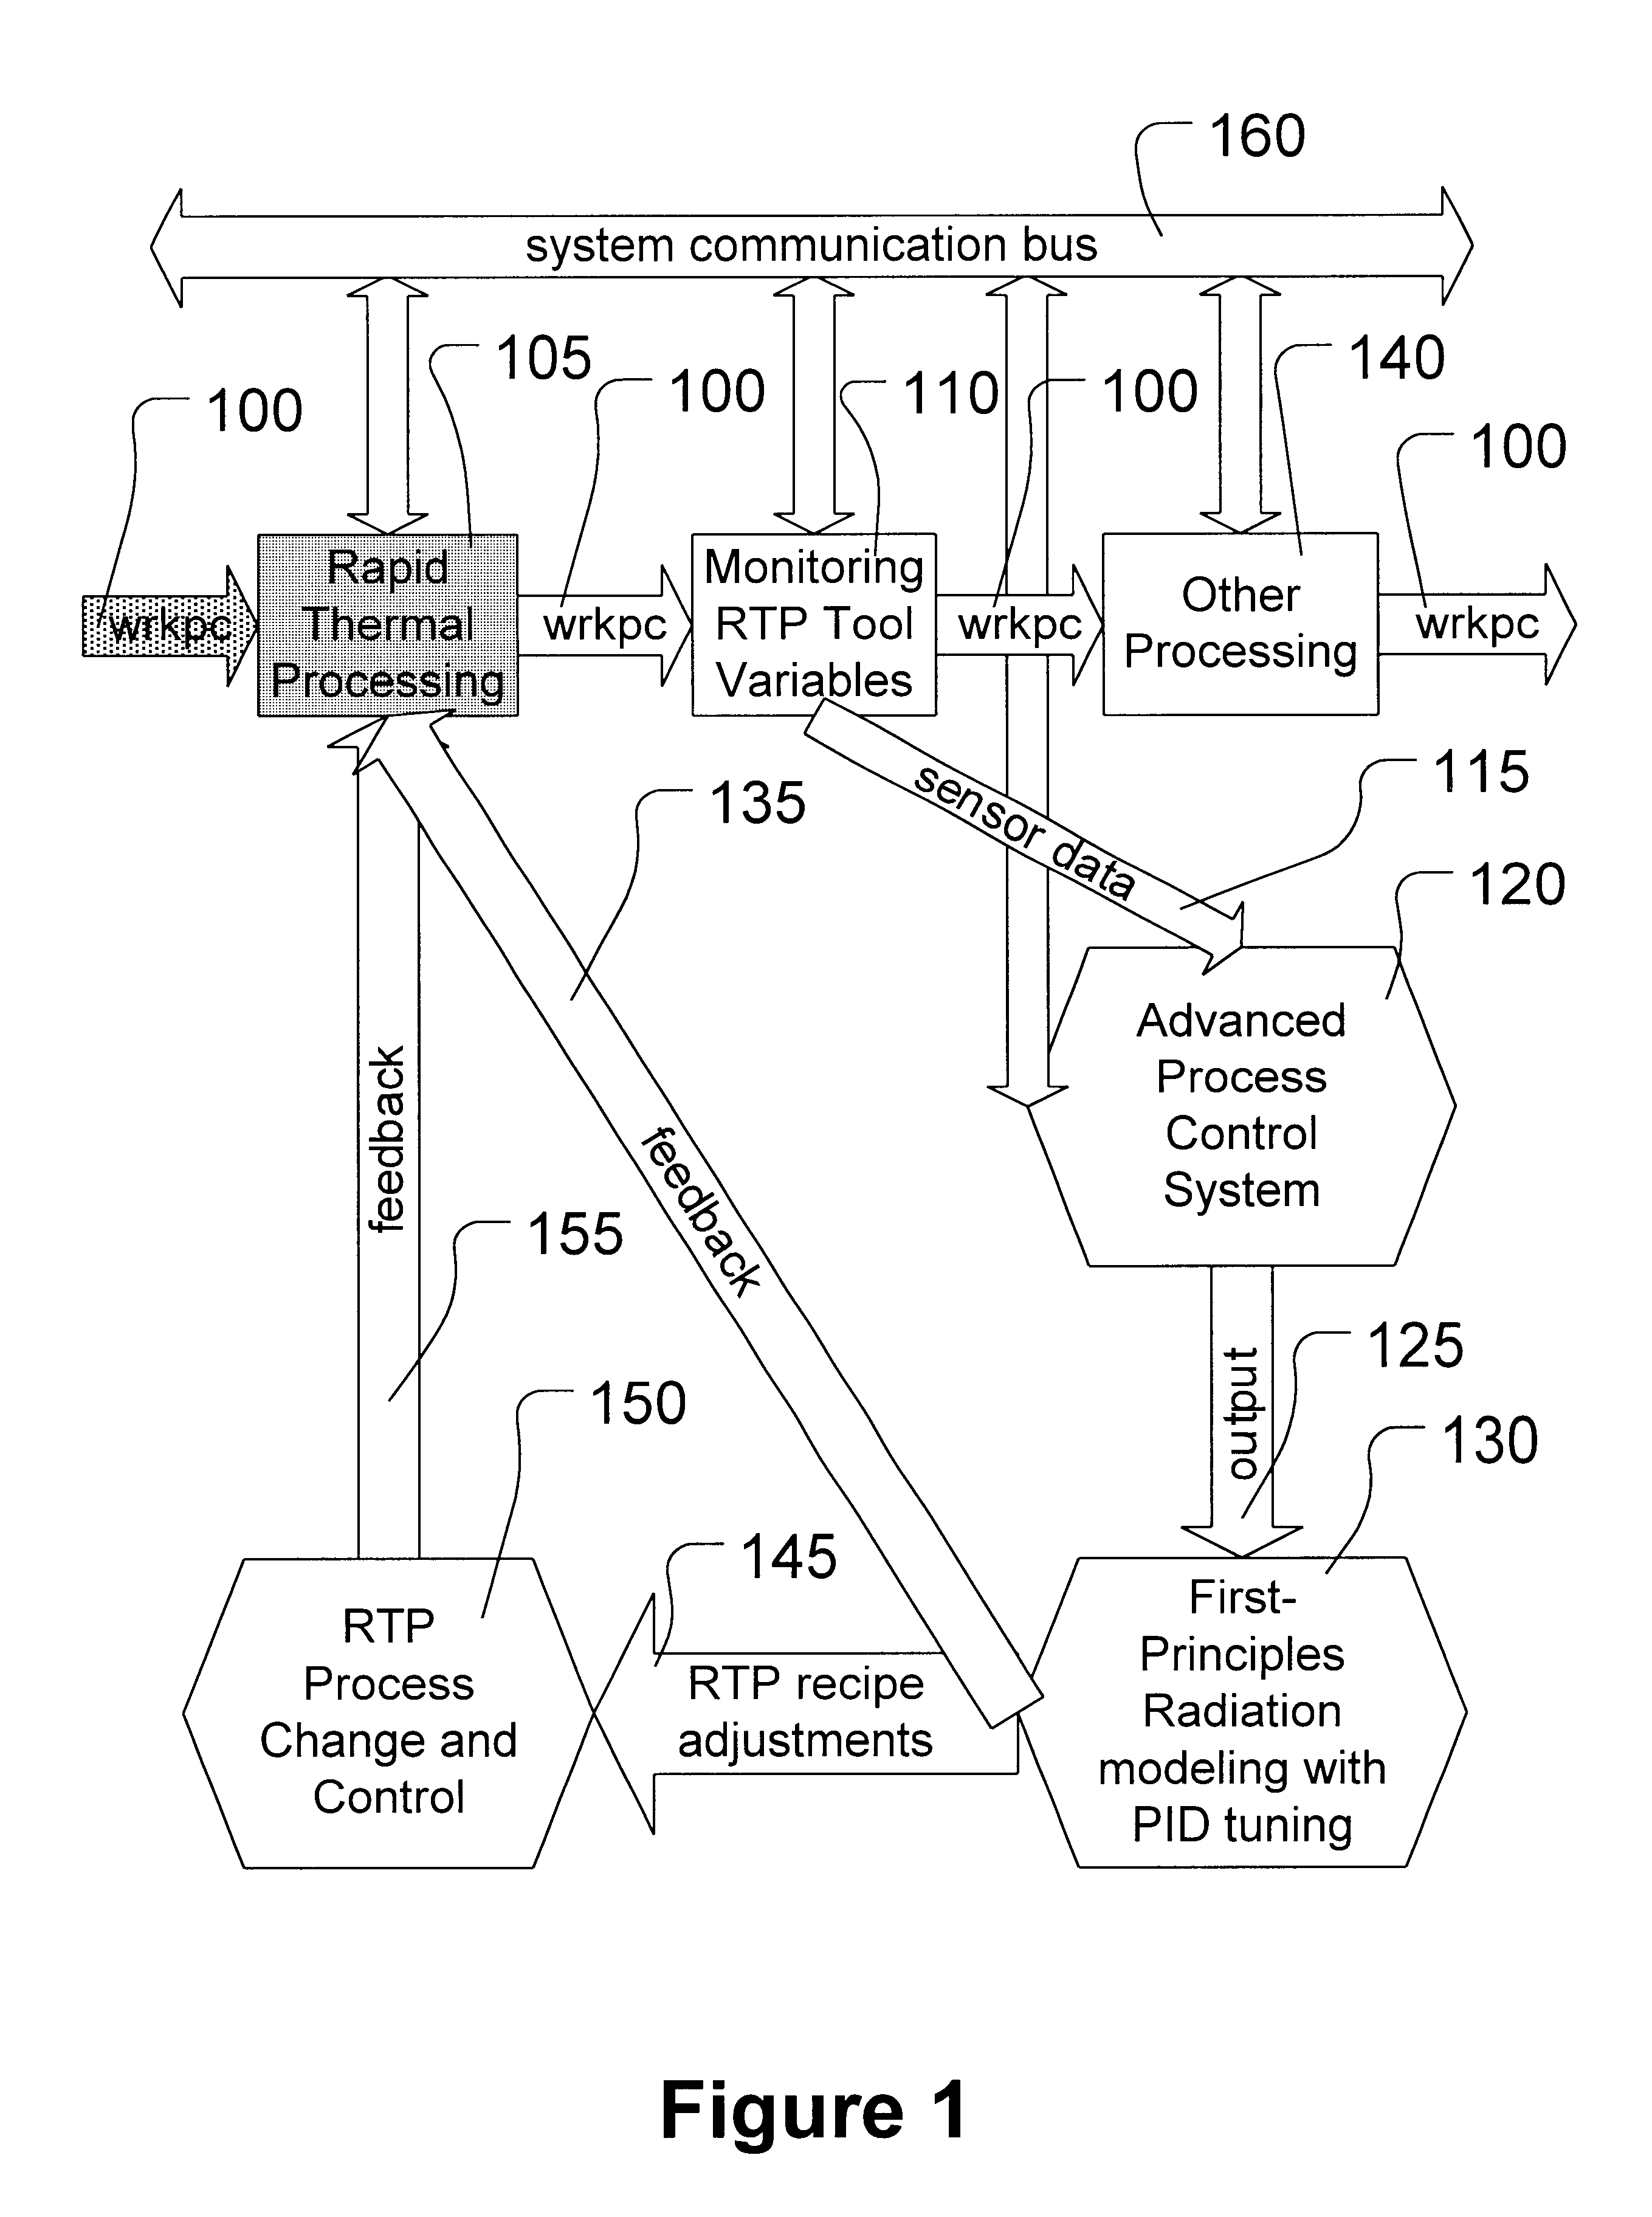 Run-to-run control method for proportional-integral-derivative (PID) controller tuning for rapid thermal processing (RTP)